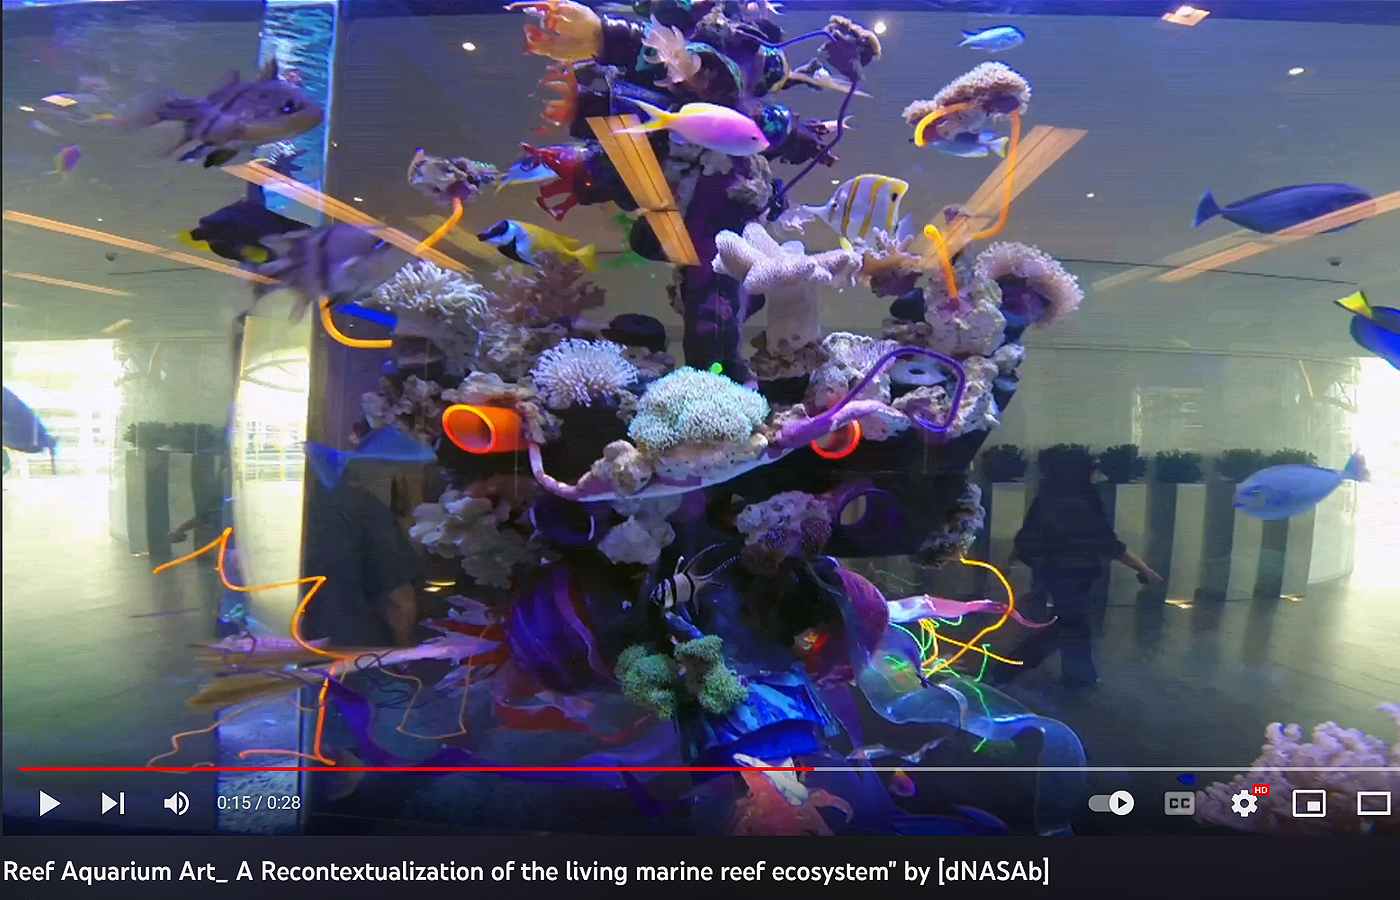 Reef Aquarium Art "A Recontextualization of the living marine reef ecosystem" by [dNASAb]